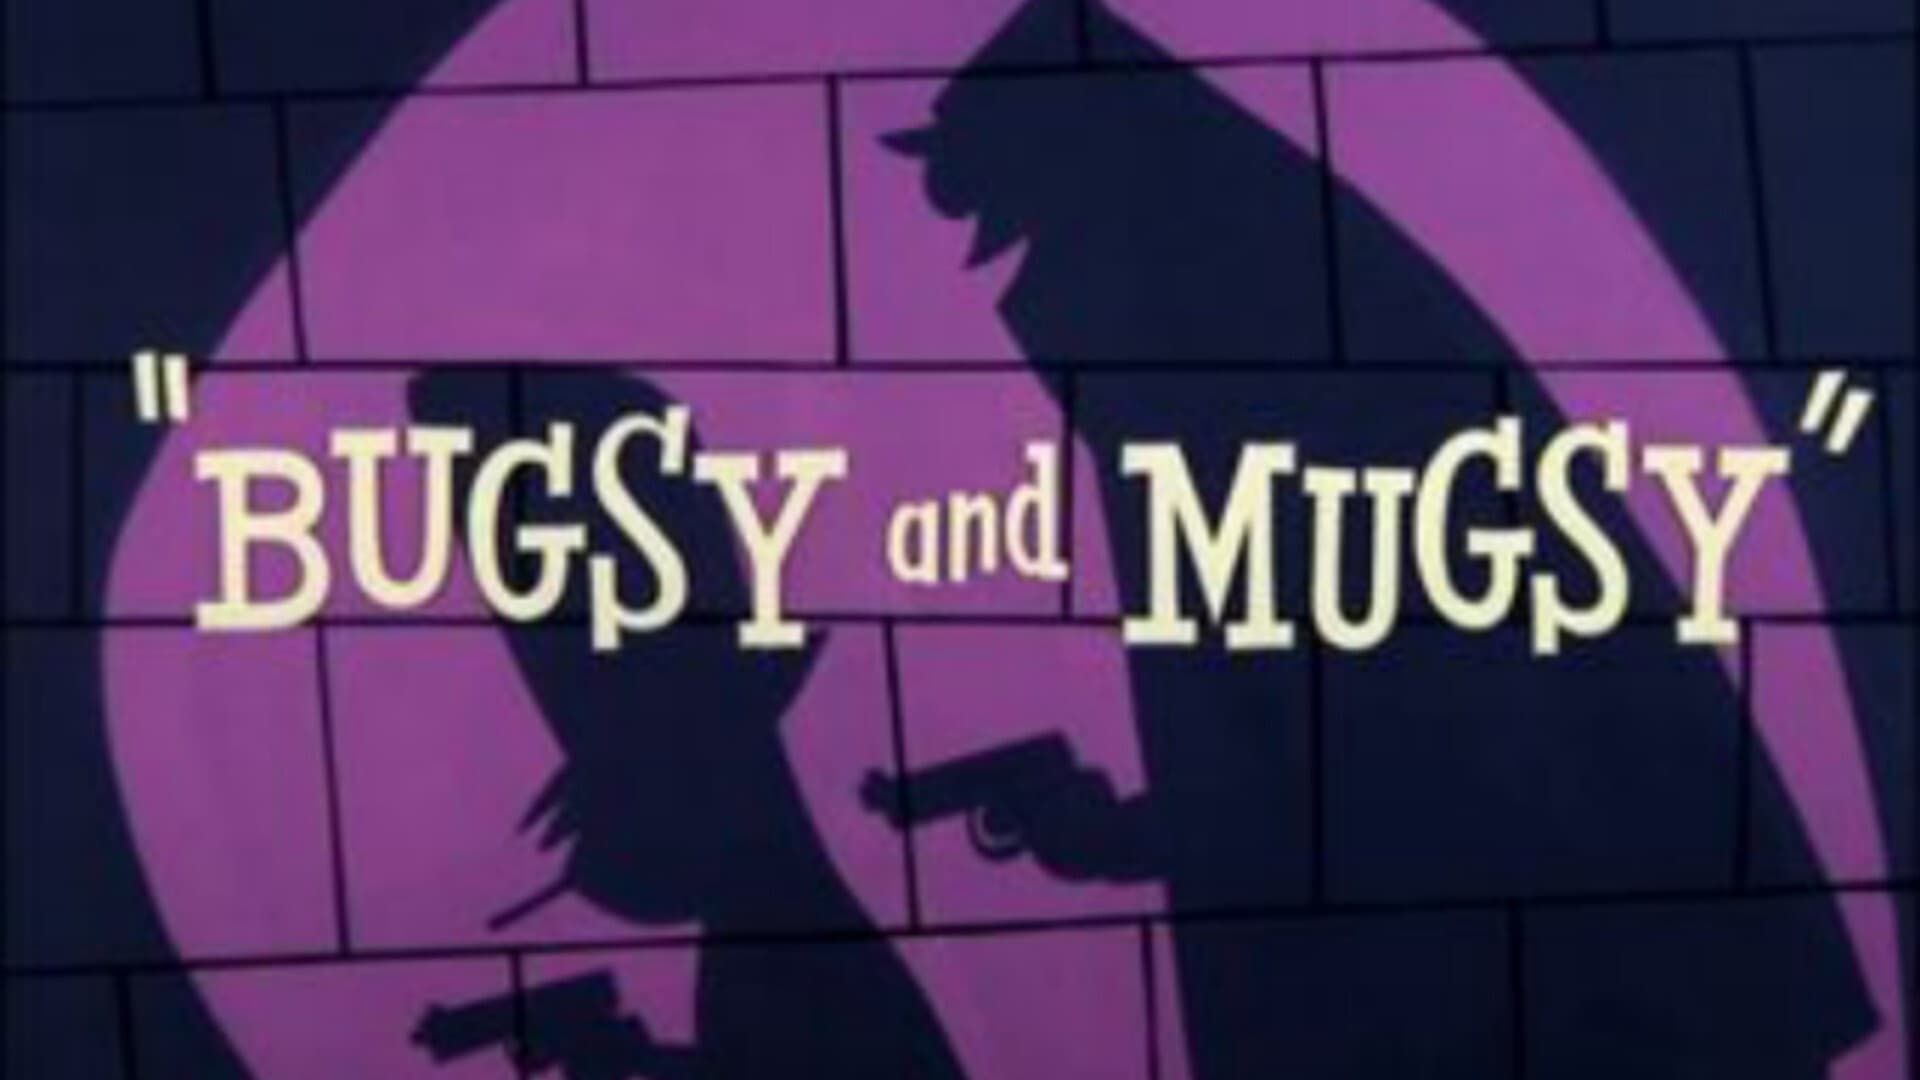 Bugsy and Mugsy background